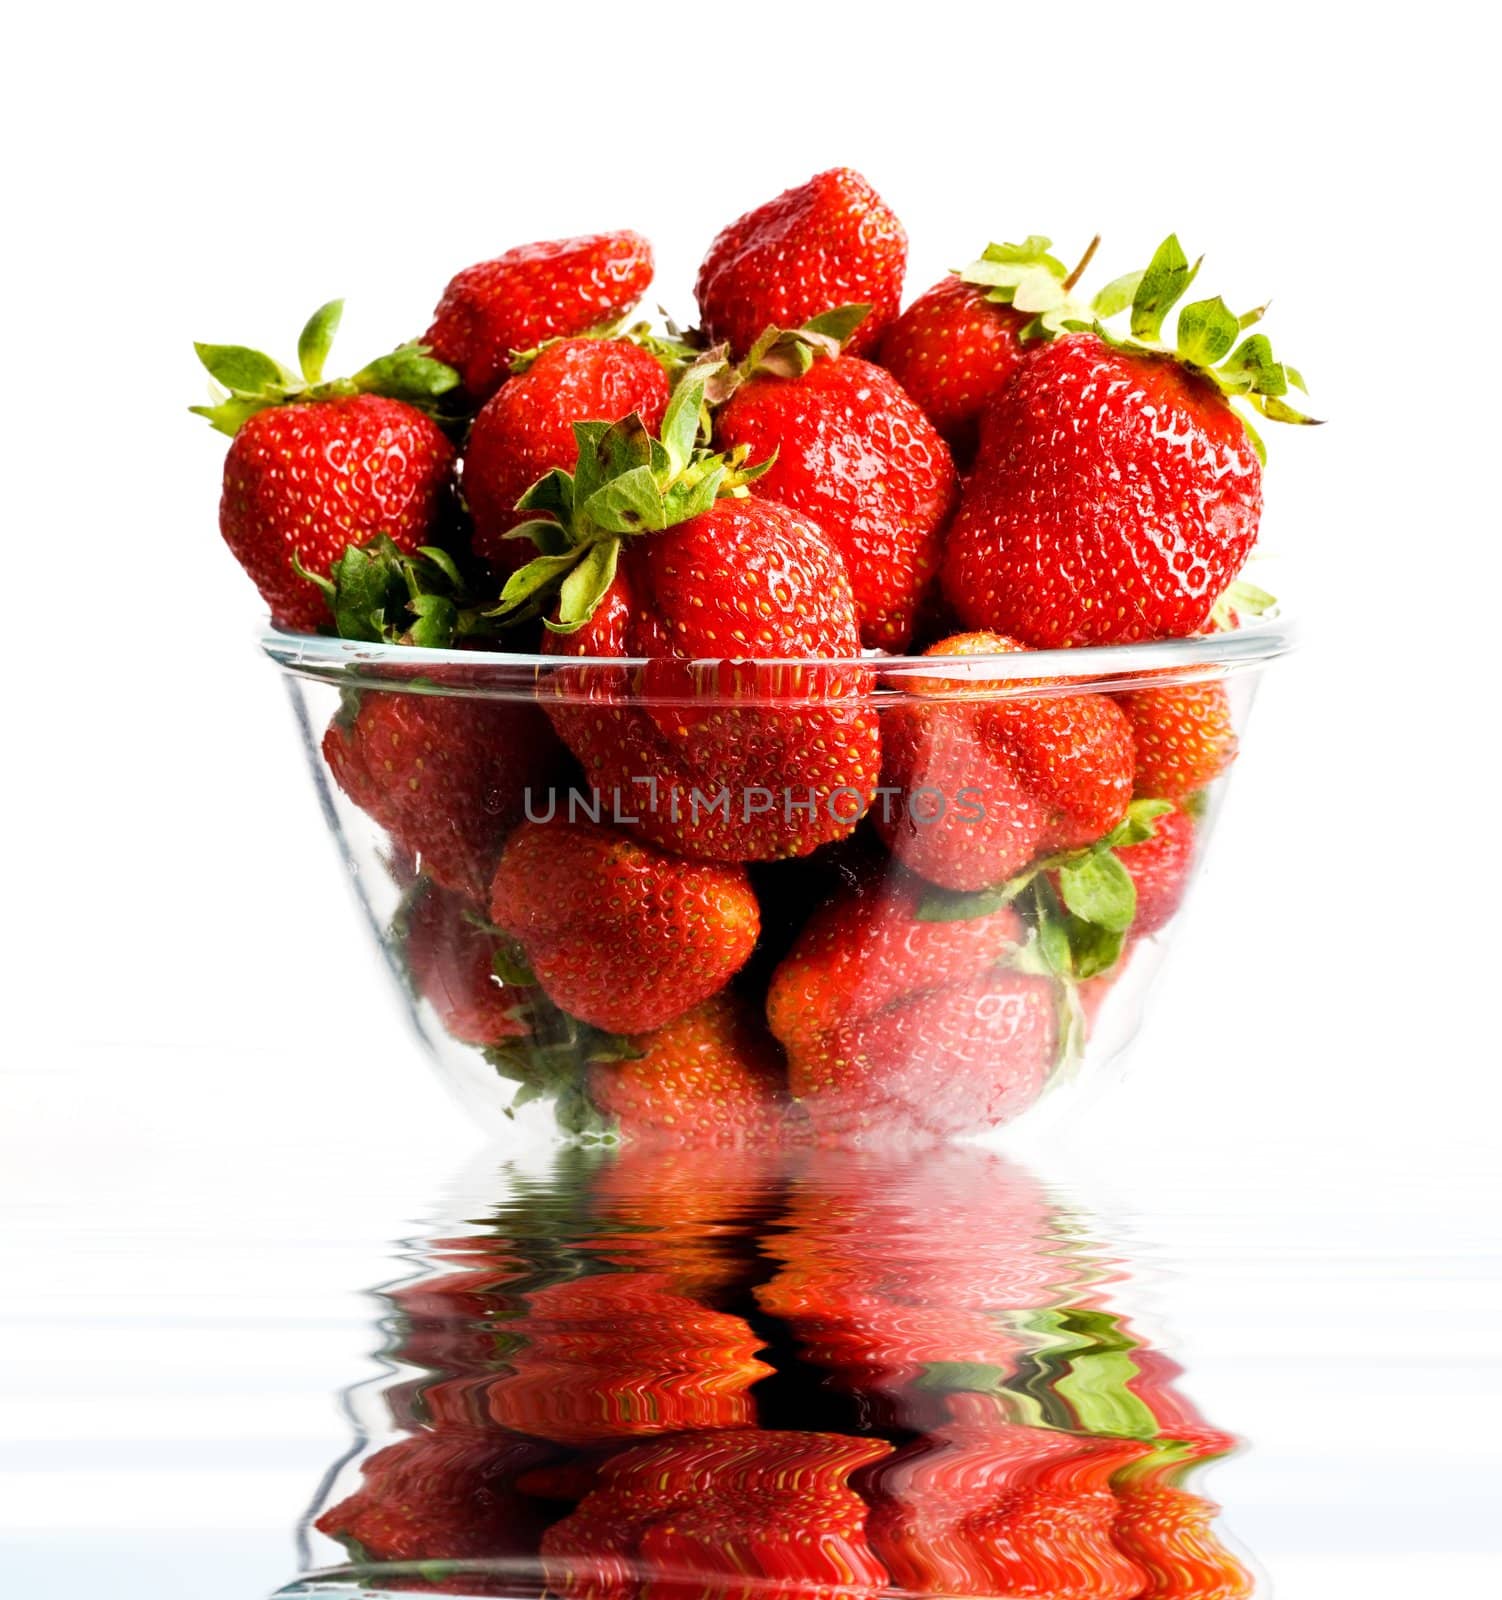 Red fresh strawberries in a glass. Reflection in water